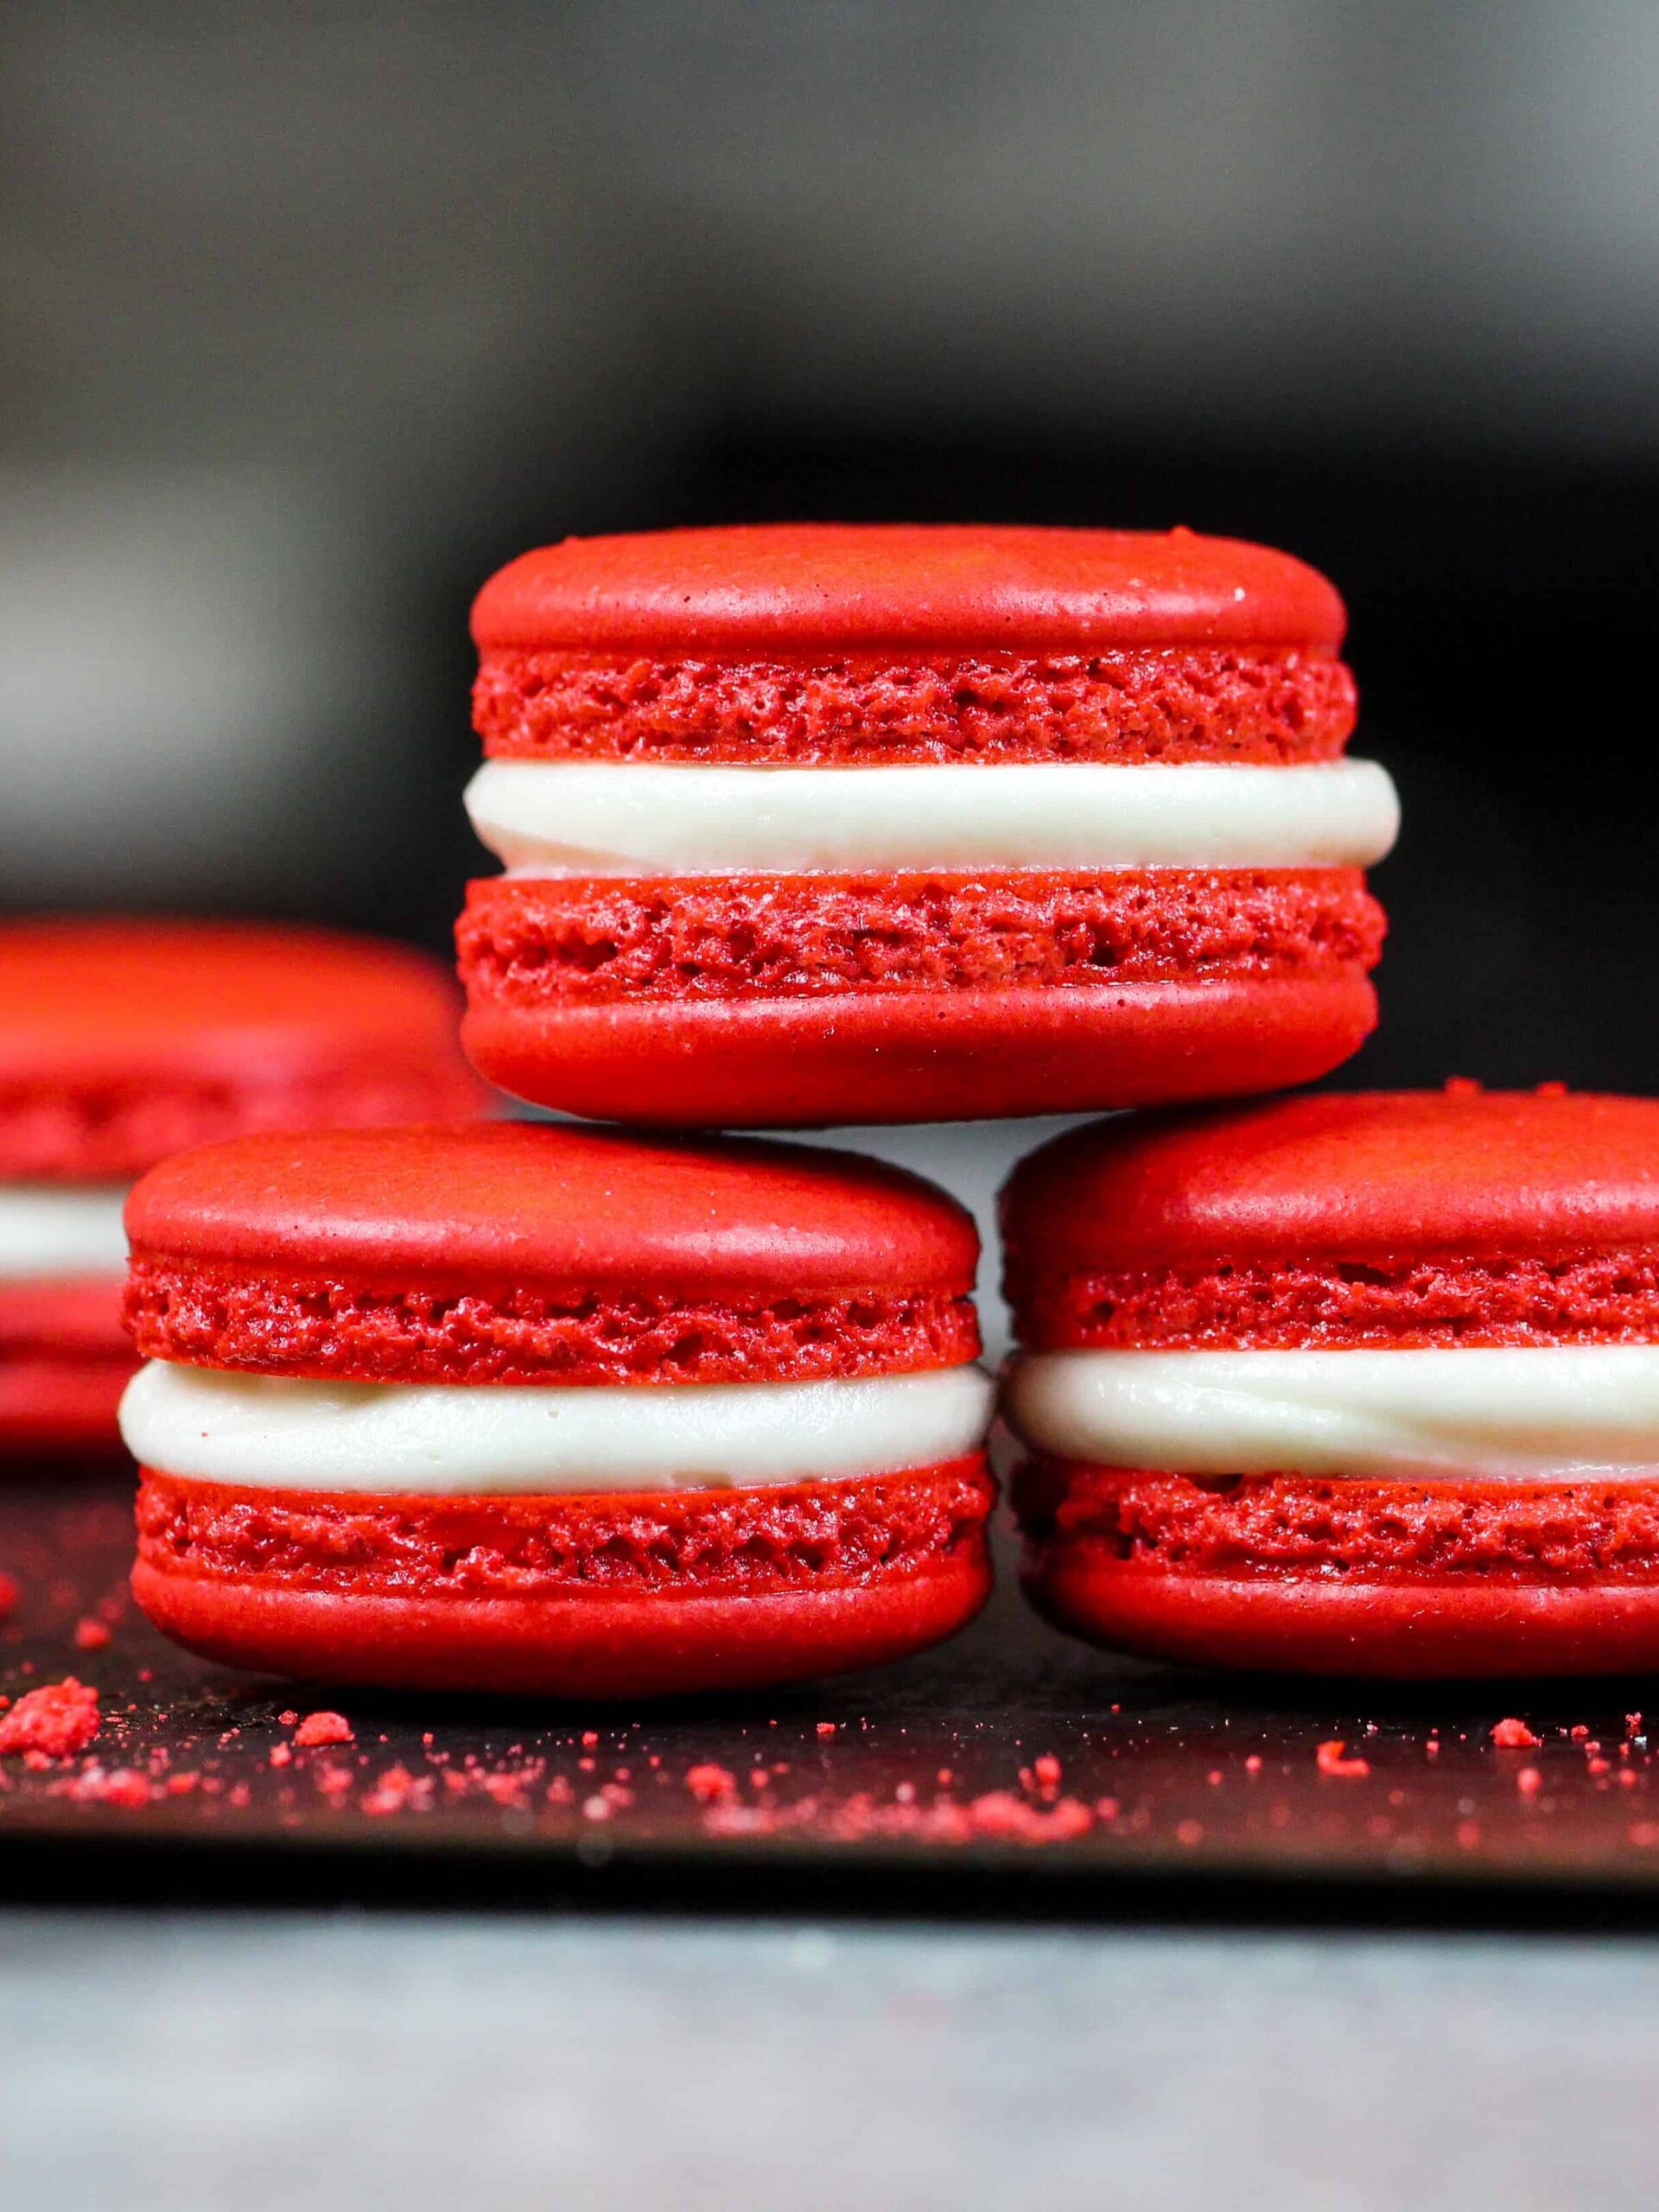 image of red velvet macarons filled with cream cheese frosting that are stacked on each other to show their perfect feet